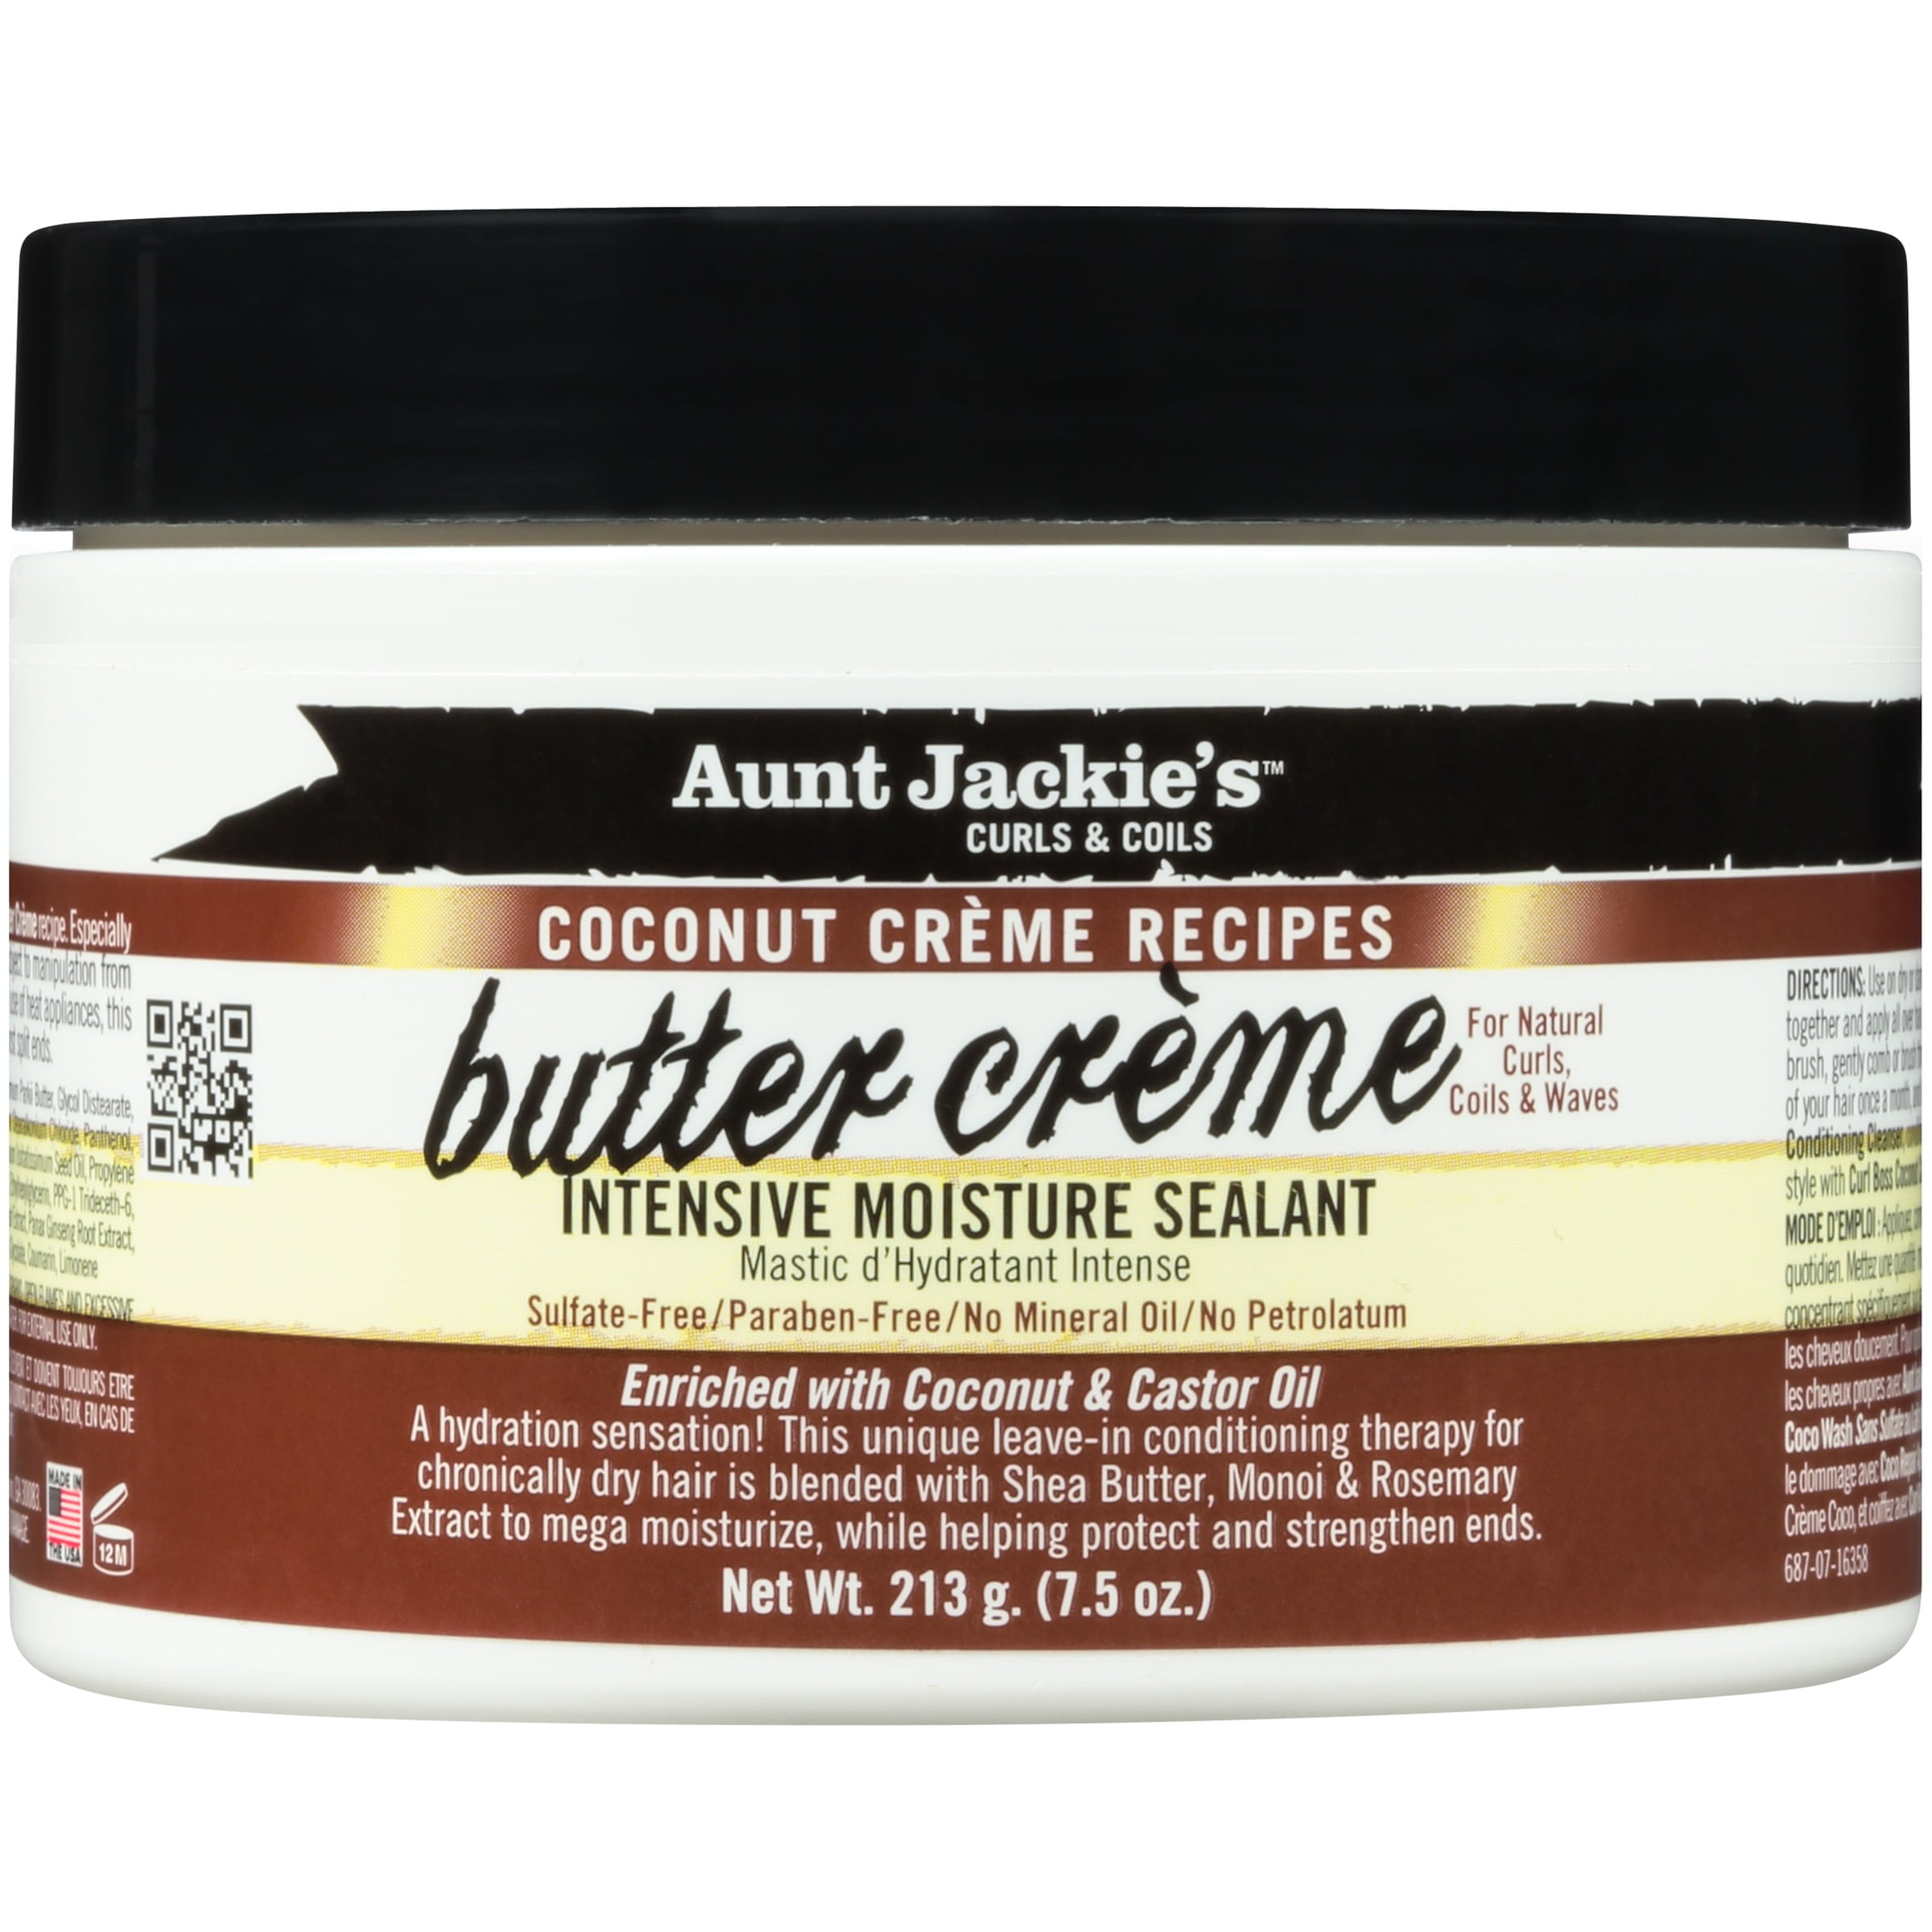 Aunt Jackie's Curls & Coils Coconut Creme Recipes Intensive Moisture  Sealant Leave-in Conditioner with Castor Oil,  oz 